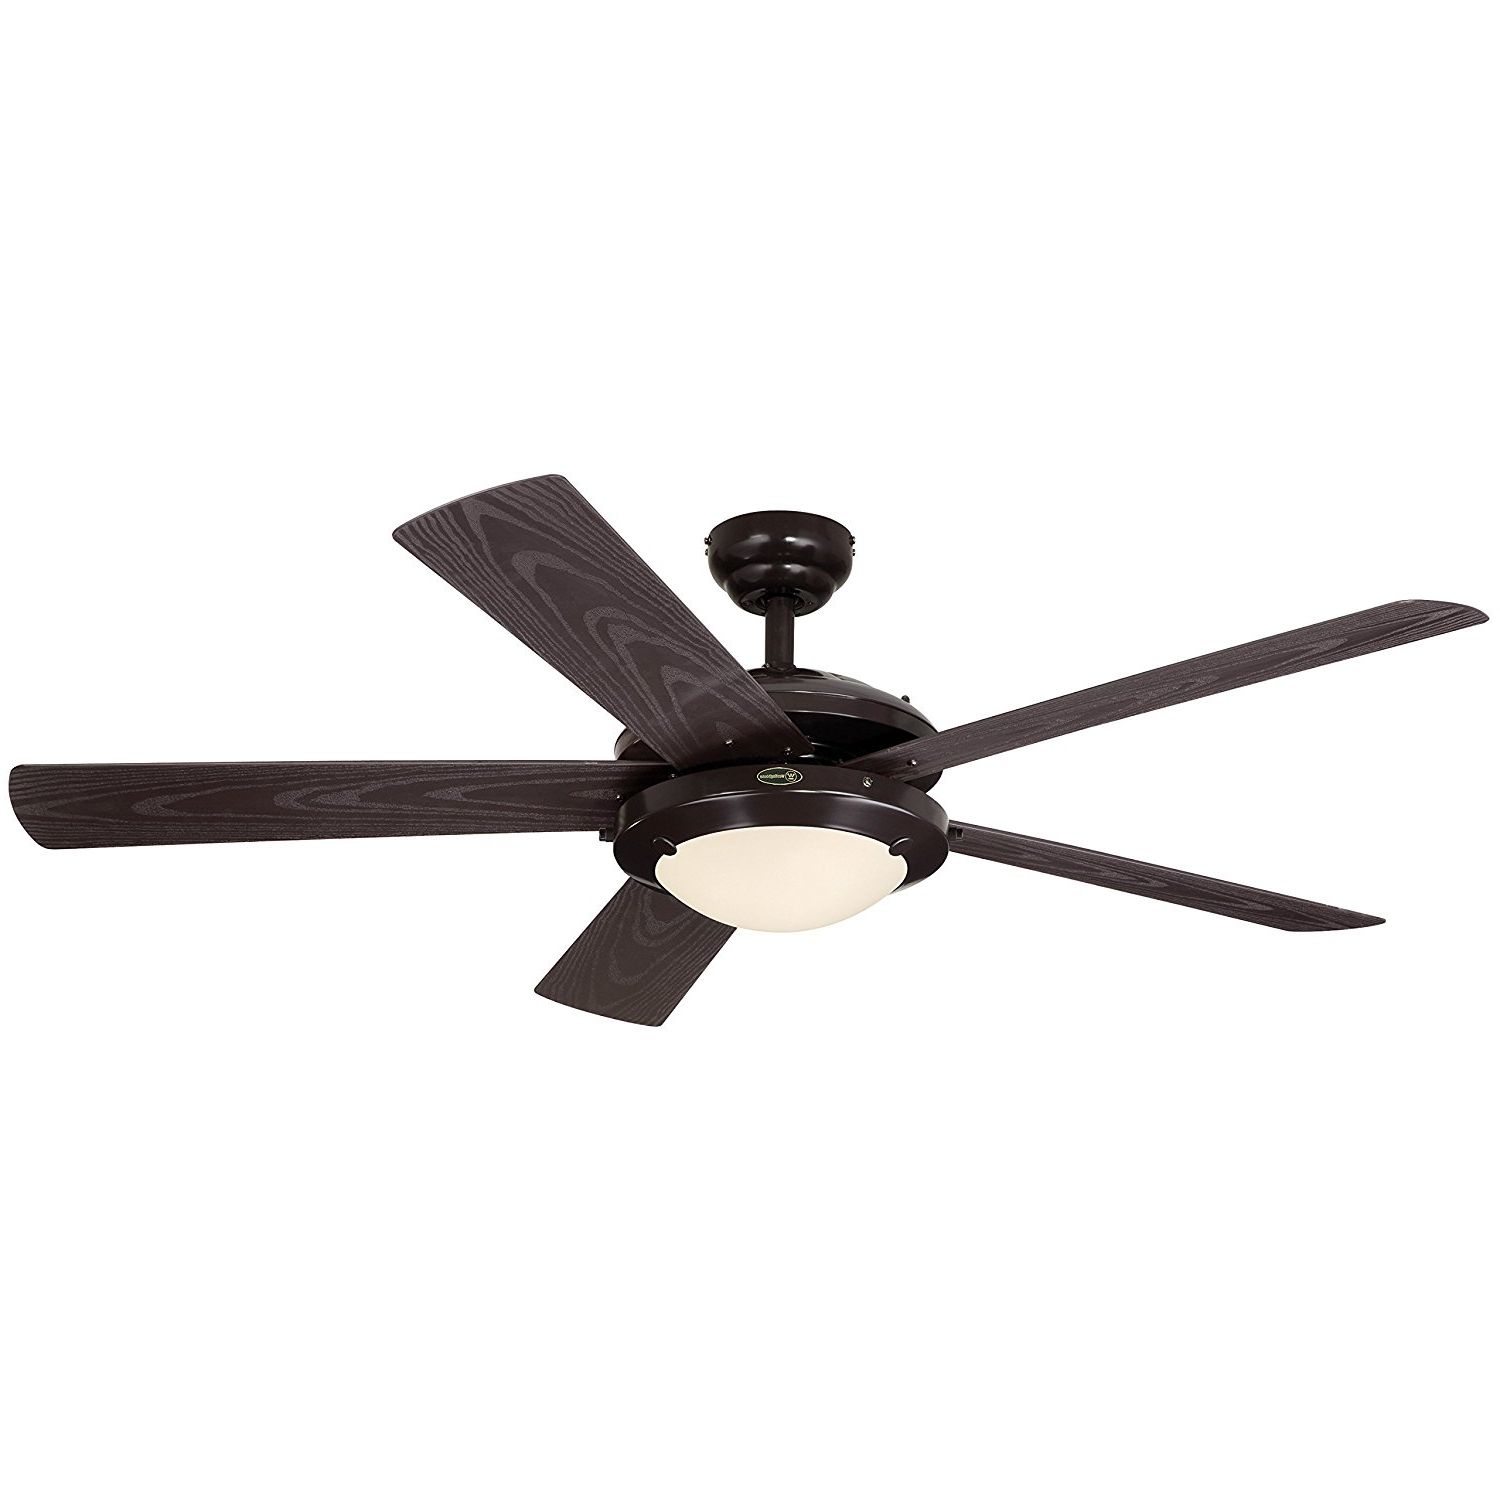 Most Recent Wayfair Outdoor Ceiling Fans With Lights Pertaining To Ceiling Fan: Best Outdoor Ceiling Fans Ideas Best Outdoor Ceiling (View 8 of 20)